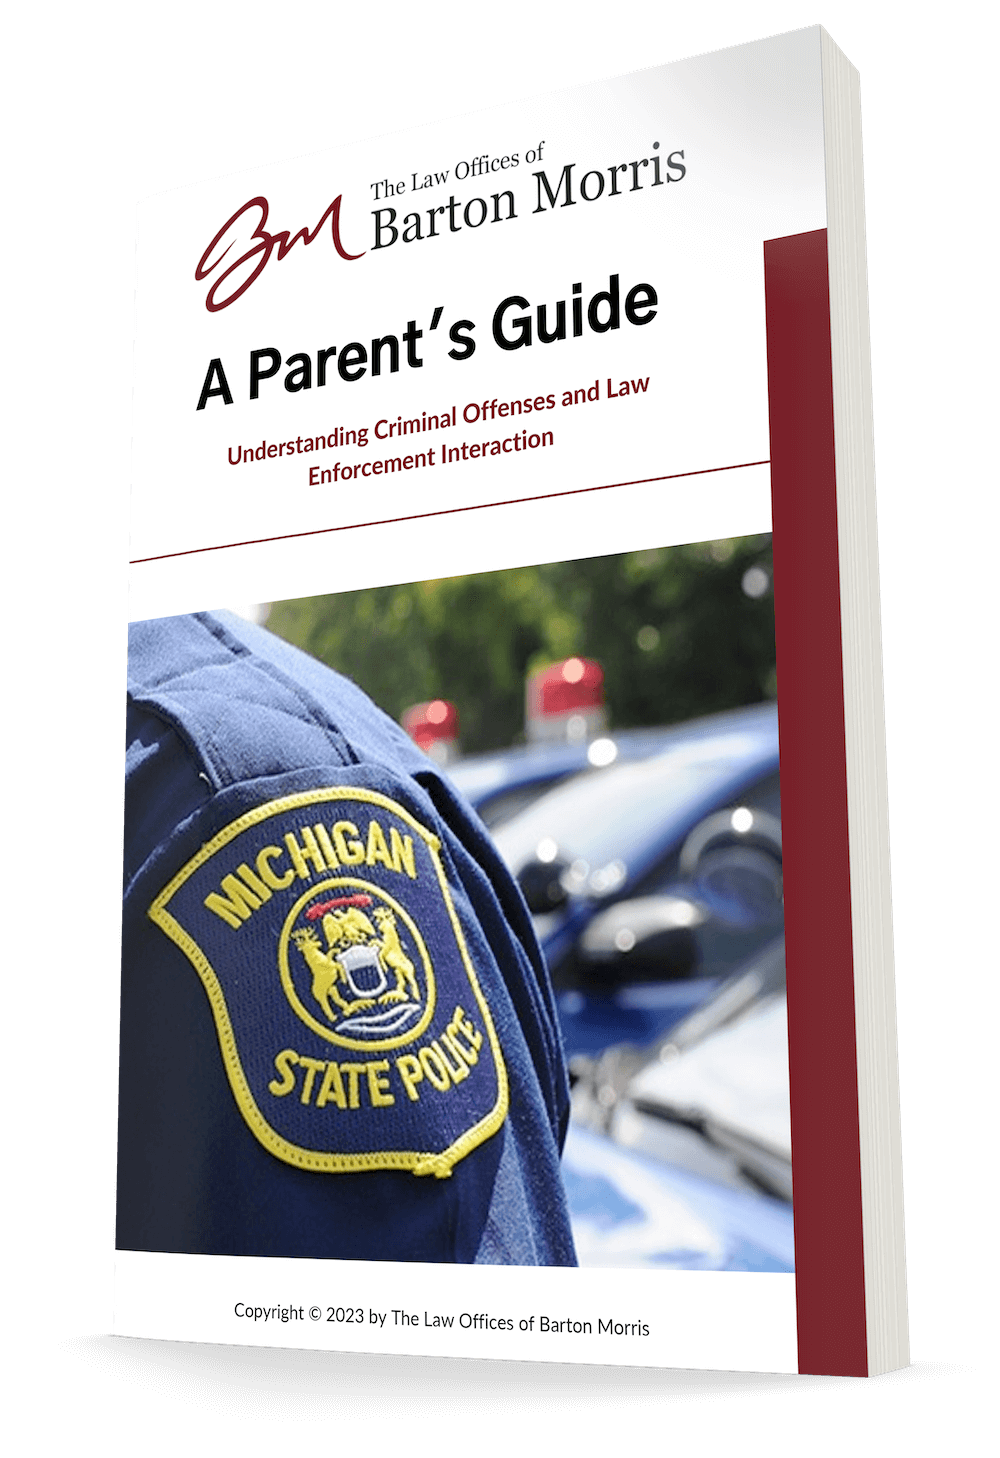 eBook cover: Parental Guide To Law Enforcement And Crimes